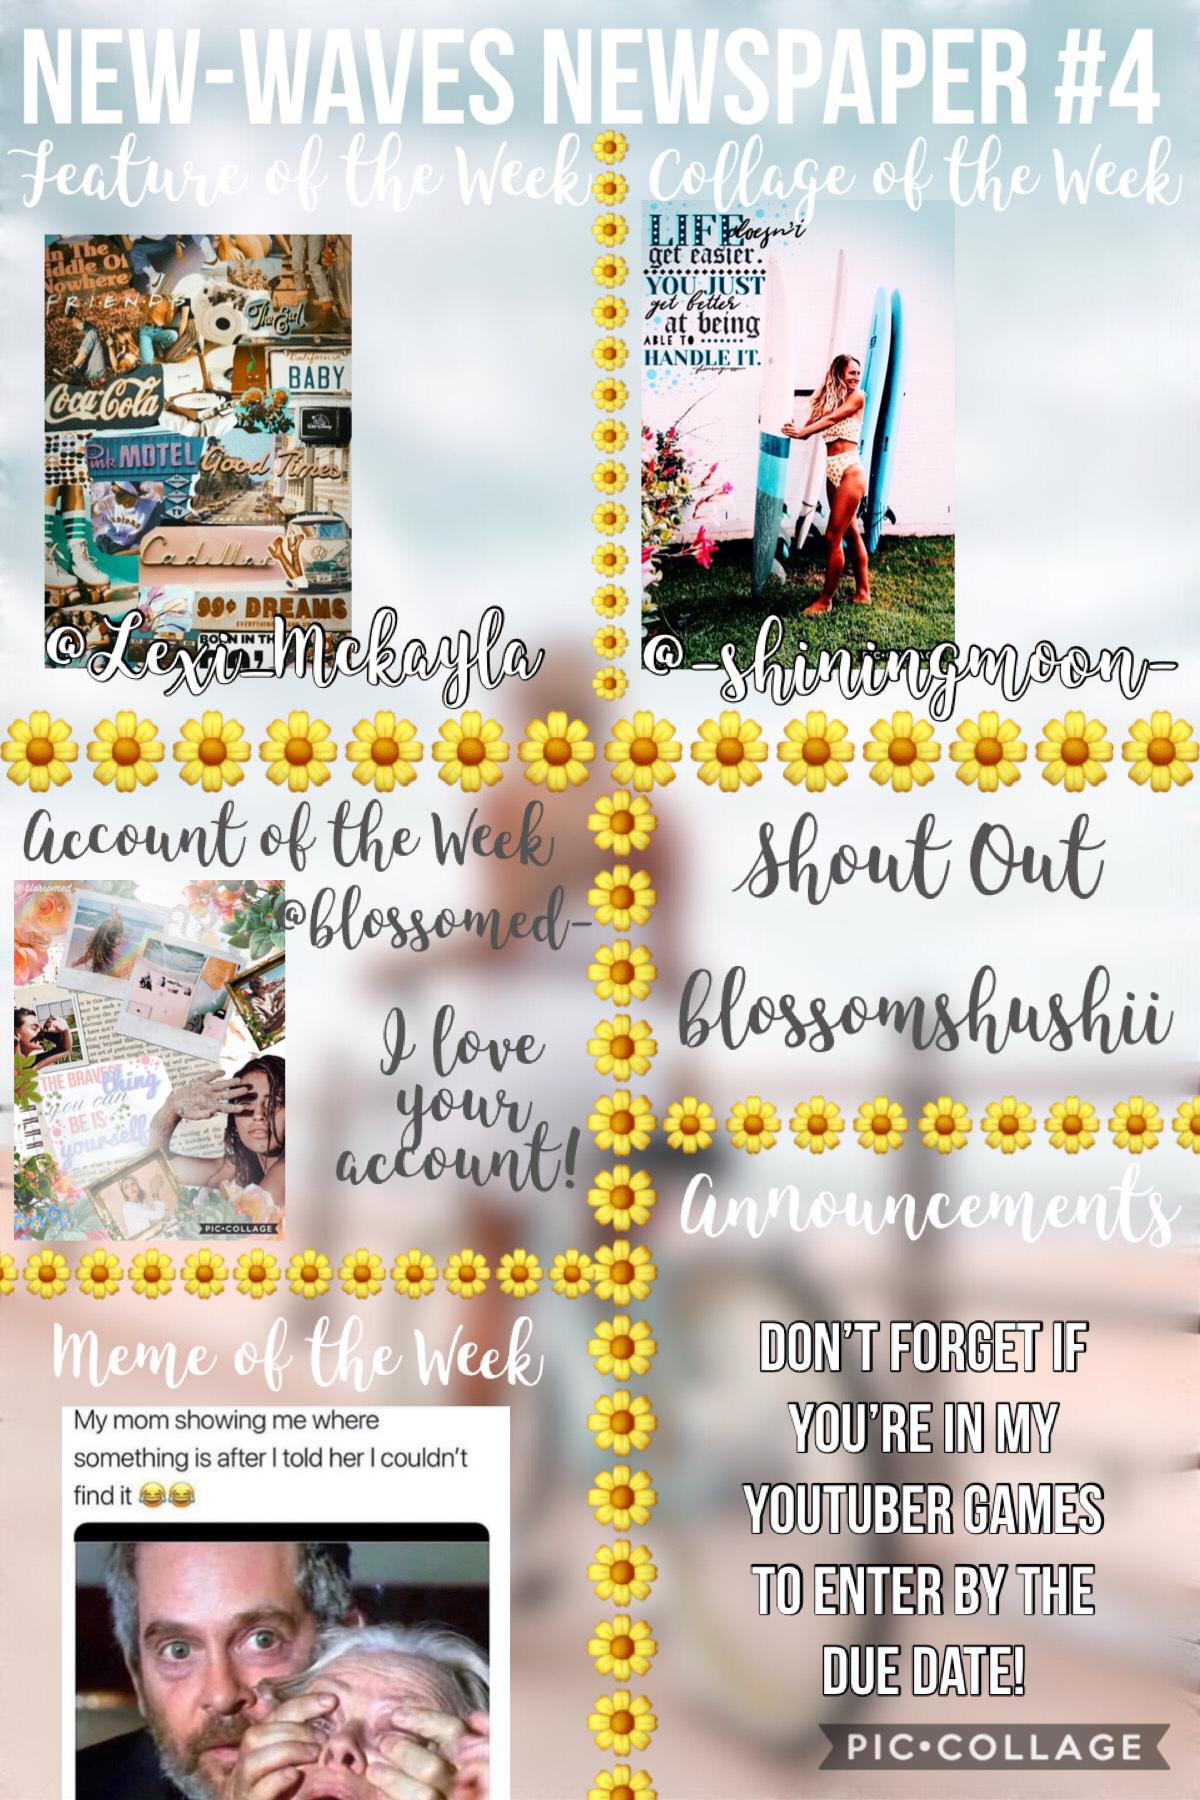 Tap! new-waves NewsPaper #4! Omg y’all I almost forgot to post this lol, sorry. I’ve been super busy and really low on inspiration... plus I’ve had my mind on someone sooo. QOTD: How many weeks till y’all are out of school AOTD: this is my last week📚❤️🌟🤪